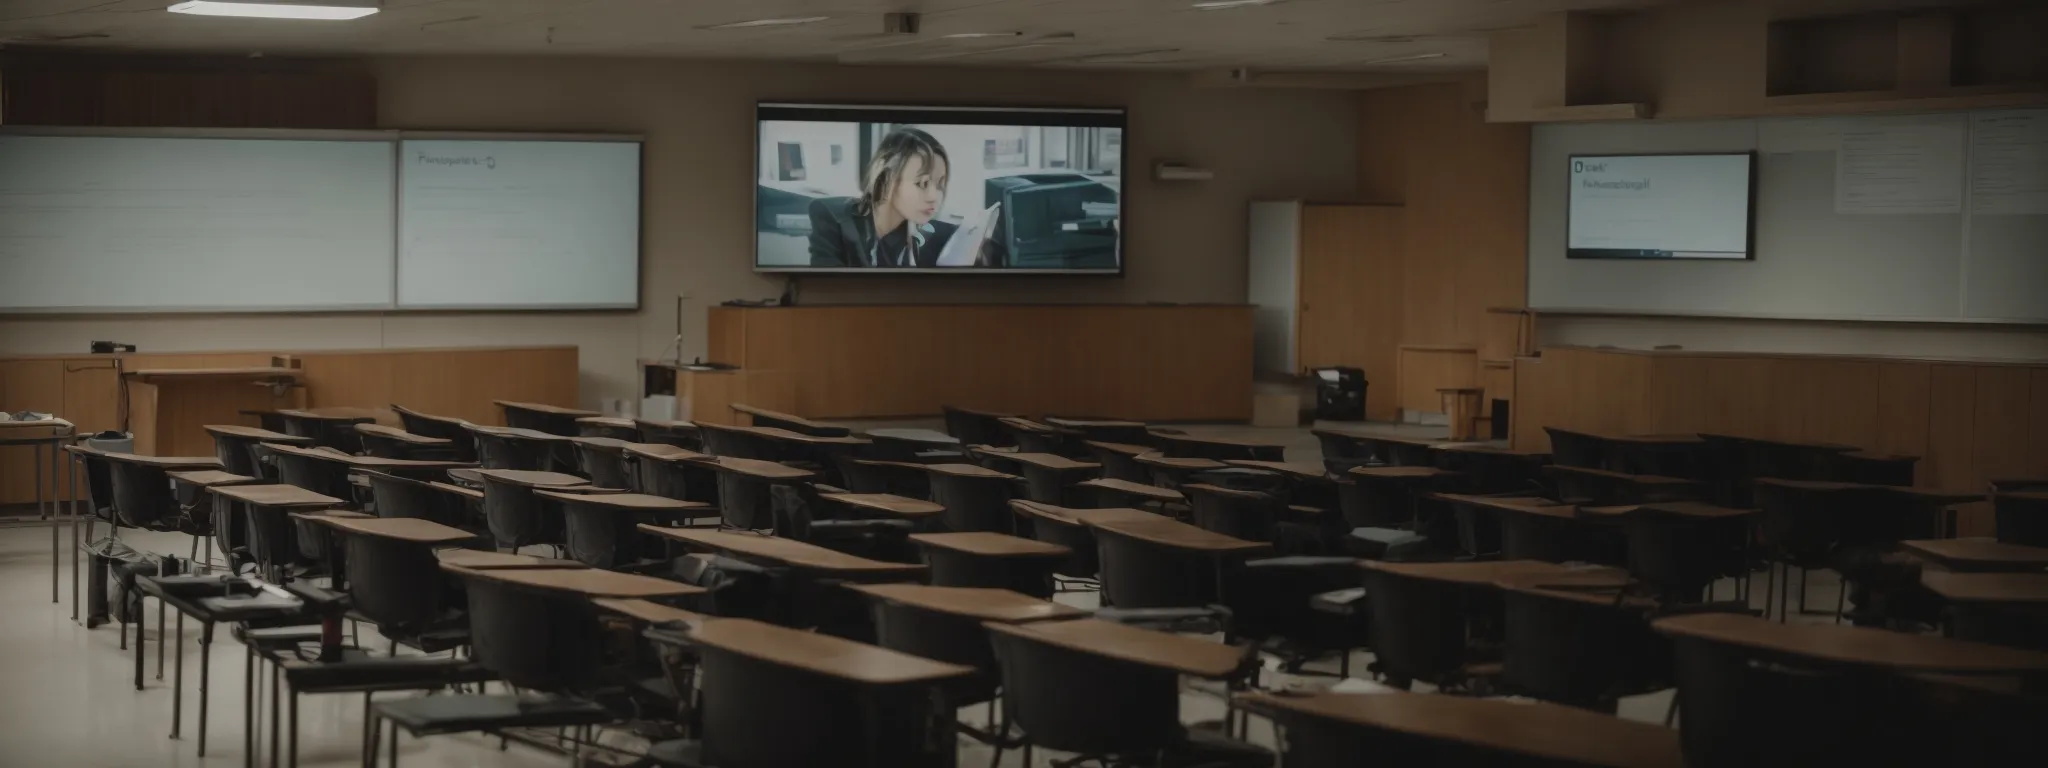 a classroom with empty seats facing a large digital screen displaying a search engine's homepage.